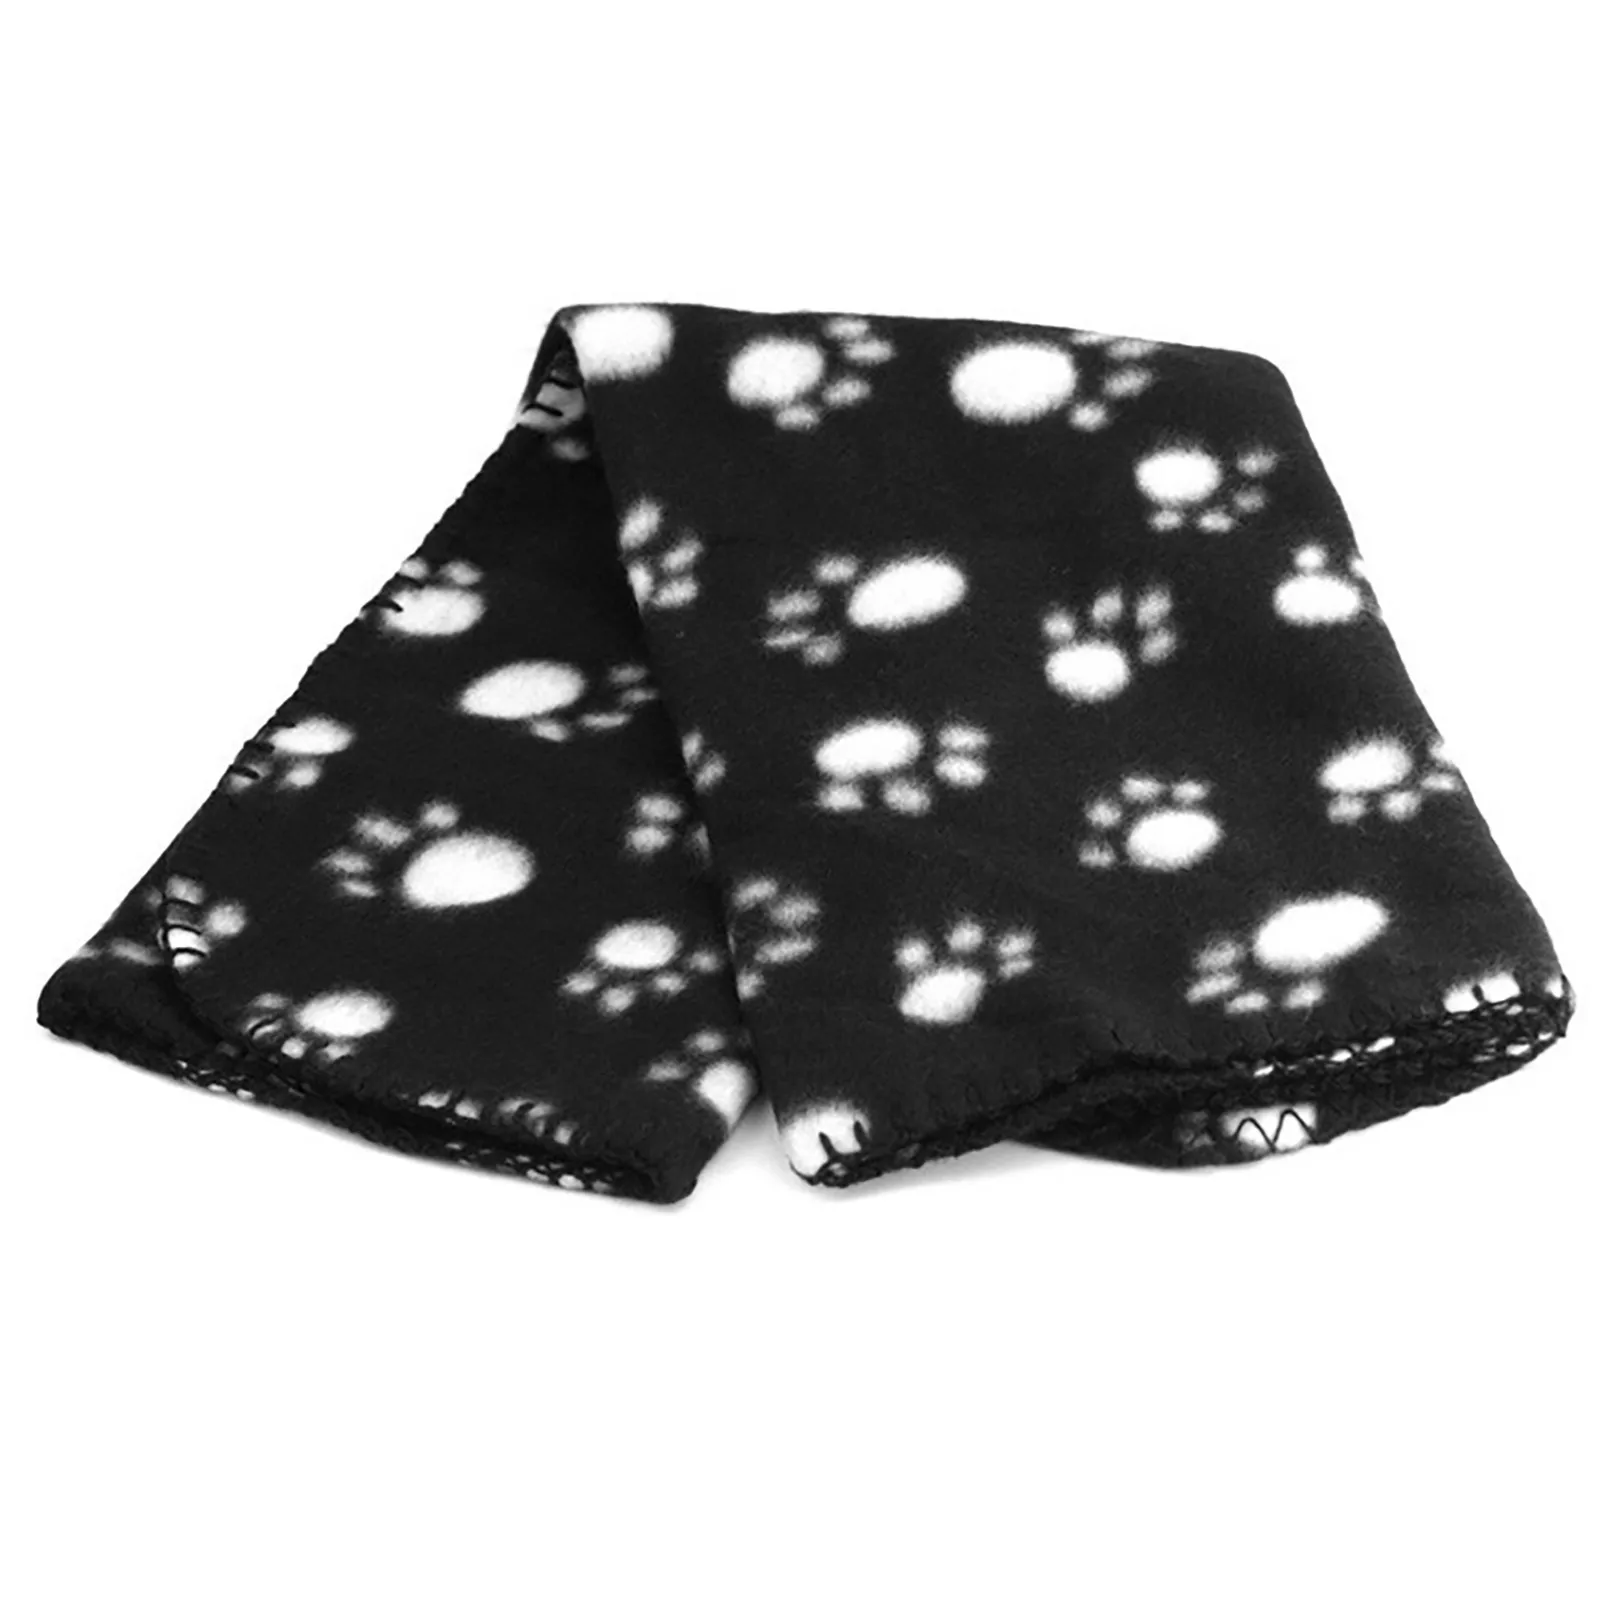 Comfortable Soft Skin Friendly Blanket Pet Products Rose Red Claw Printing Small Mats Dogs Cats Puppuy Soft Warm Pet Mats